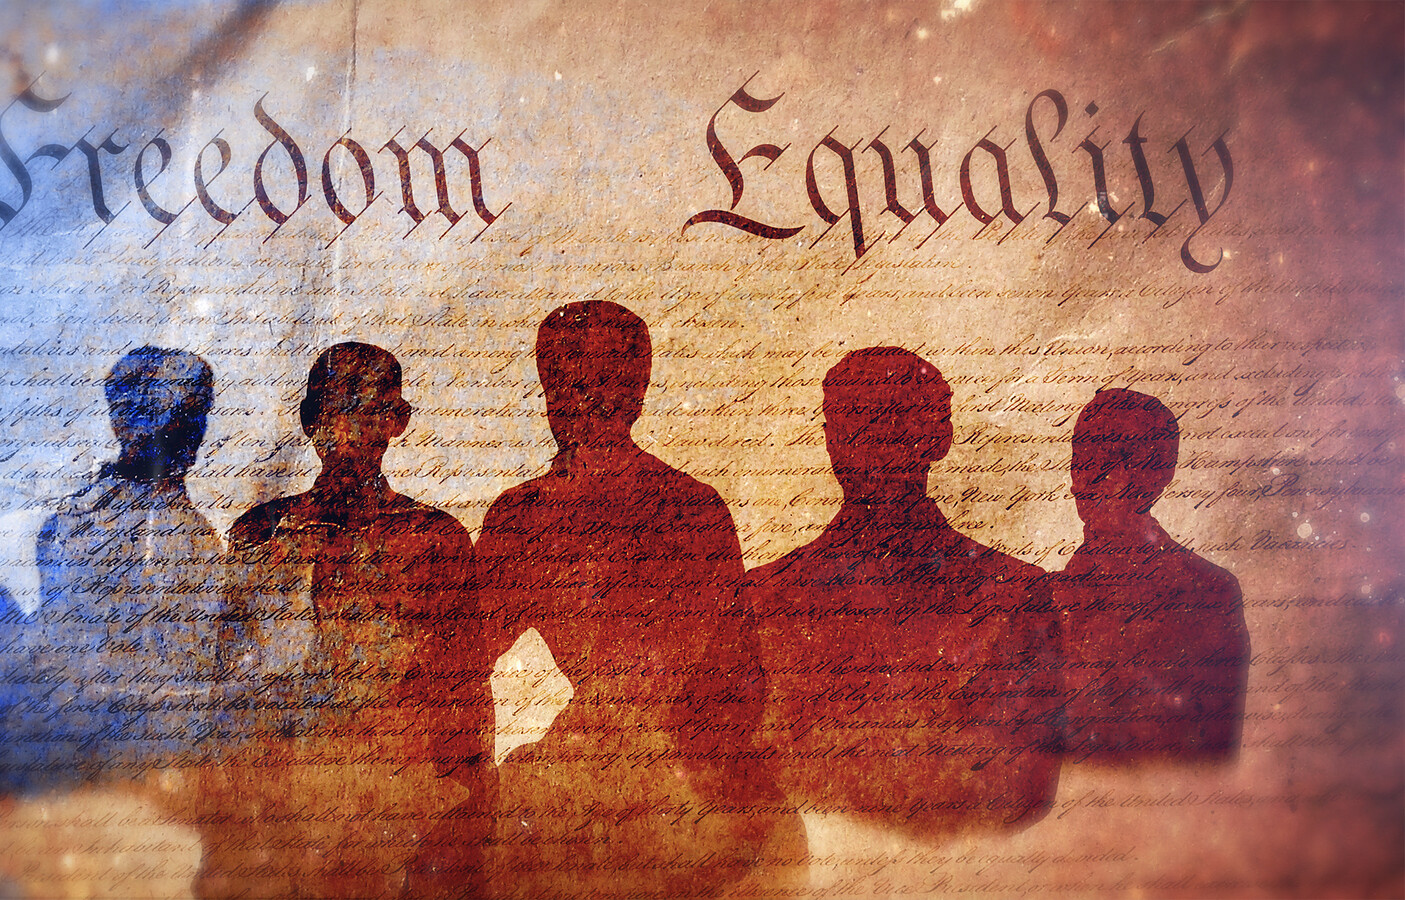 freedom and equality graphic